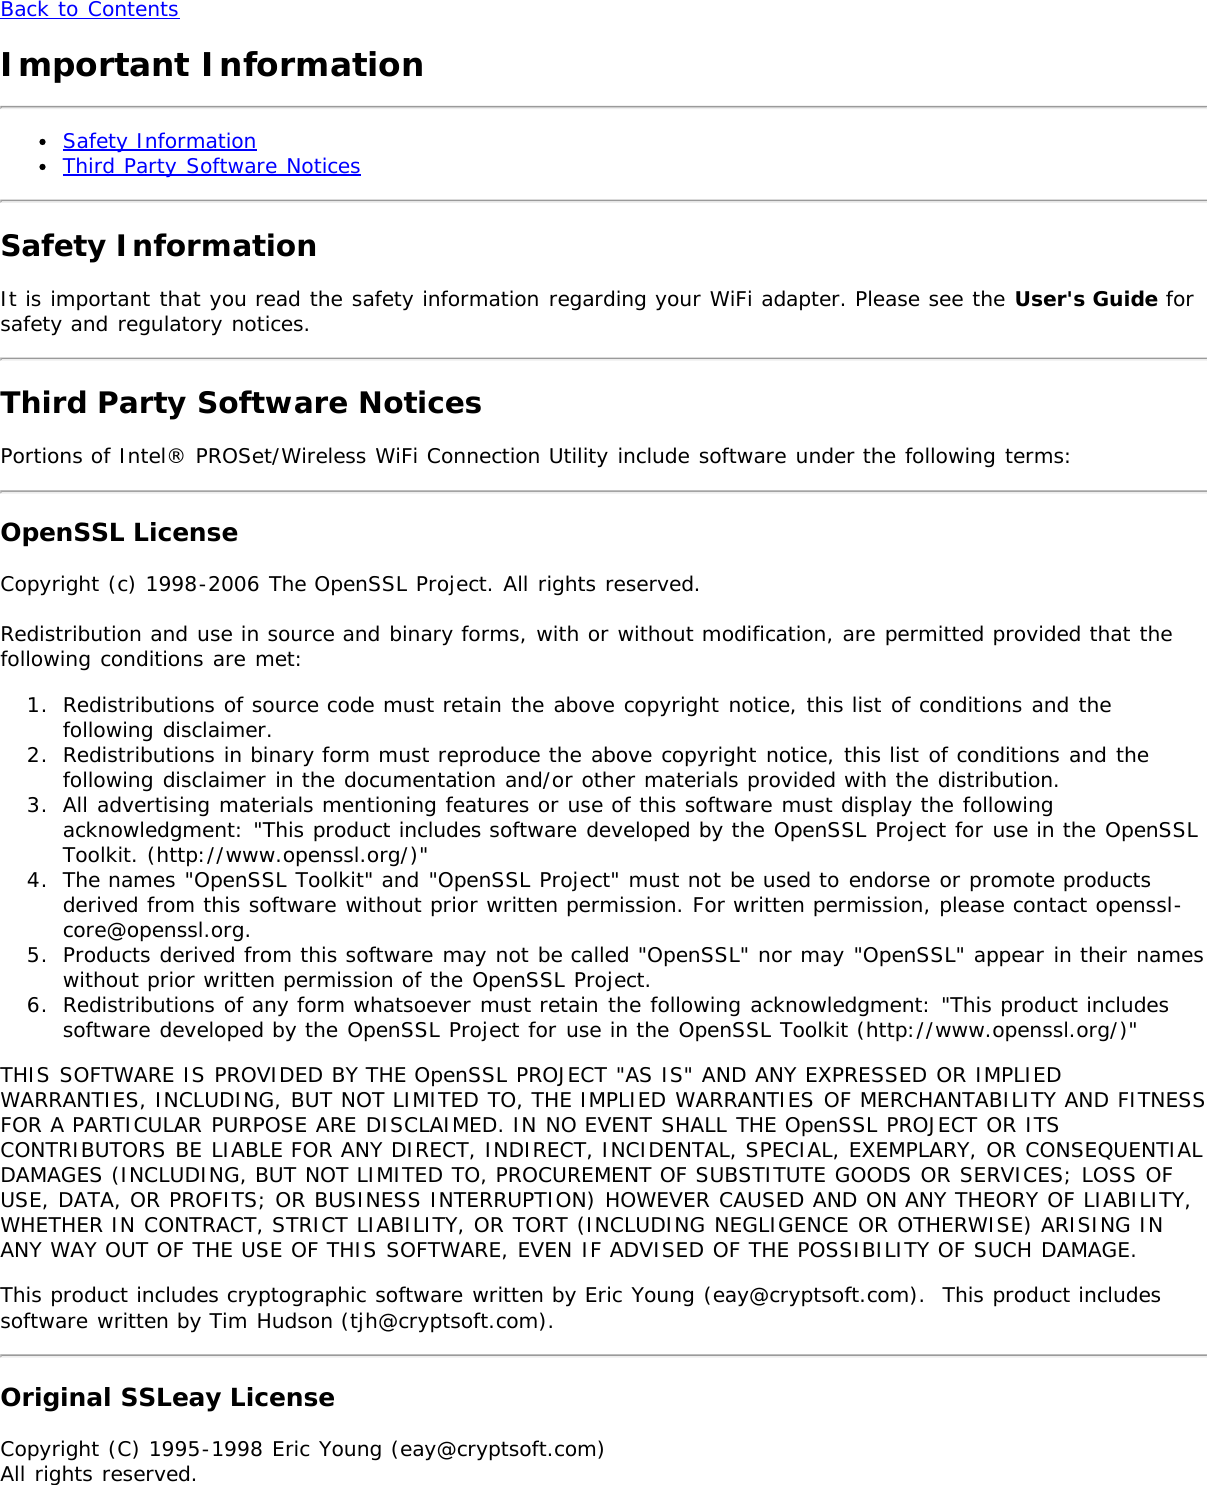 Back to ContentsImportant InformationSafety InformationThird Party Software NoticesSafety InformationIt is important that you read the safety information regarding your WiFi adapter. Please see the User&apos;s Guide forsafety and regulatory notices.Third Party Software NoticesPortions of Intel® PROSet/Wireless WiFi Connection Utility include software under the following terms:OpenSSL LicenseCopyright (c) 1998-2006 The OpenSSL Project. All rights reserved.Redistribution and use in source and binary forms, with or without modification, are permitted provided that thefollowing conditions are met:1.  Redistributions of source code must retain the above copyright notice, this list of conditions and thefollowing disclaimer.2.  Redistributions in binary form must reproduce the above copyright notice, this list of conditions and thefollowing disclaimer in the documentation and/or other materials provided with the distribution.3.  All advertising materials mentioning features or use of this software must display the followingacknowledgment: &quot;This product includes software developed by the OpenSSL Project for use in the OpenSSLToolkit. (http://www.openssl.org/)&quot;4.  The names &quot;OpenSSL Toolkit&quot; and &quot;OpenSSL Project&quot; must not be used to endorse or promote productsderived from this software without prior written permission. For written permission, please contact openssl-core@openssl.org.5.  Products derived from this software may not be called &quot;OpenSSL&quot; nor may &quot;OpenSSL&quot; appear in their nameswithout prior written permission of the OpenSSL Project.6.  Redistributions of any form whatsoever must retain the following acknowledgment: &quot;This product includessoftware developed by the OpenSSL Project for use in the OpenSSL Toolkit (http://www.openssl.org/)&quot;THIS SOFTWARE IS PROVIDED BY THE OpenSSL PROJECT &quot;AS IS&quot; AND ANY EXPRESSED OR IMPLIEDWARRANTIES, INCLUDING, BUT NOT LIMITED TO, THE IMPLIED WARRANTIES OF MERCHANTABILITY AND FITNESSFOR A PARTICULAR PURPOSE ARE DISCLAIMED. IN NO EVENT SHALL THE OpenSSL PROJECT OR ITSCONTRIBUTORS BE LIABLE FOR ANY DIRECT, INDIRECT, INCIDENTAL, SPECIAL, EXEMPLARY, OR CONSEQUENTIALDAMAGES (INCLUDING, BUT NOT LIMITED TO, PROCUREMENT OF SUBSTITUTE GOODS OR SERVICES; LOSS OFUSE, DATA, OR PROFITS; OR BUSINESS INTERRUPTION) HOWEVER CAUSED AND ON ANY THEORY OF LIABILITY,WHETHER IN CONTRACT, STRICT LIABILITY, OR TORT (INCLUDING NEGLIGENCE OR OTHERWISE) ARISING INANY WAY OUT OF THE USE OF THIS SOFTWARE, EVEN IF ADVISED OF THE POSSIBILITY OF SUCH DAMAGE.This product includes cryptographic software written by Eric Young (eay@cryptsoft.com).  This product includessoftware written by Tim Hudson (tjh@cryptsoft.com).Original SSLeay LicenseCopyright (C) 1995-1998 Eric Young (eay@cryptsoft.com)All rights reserved.